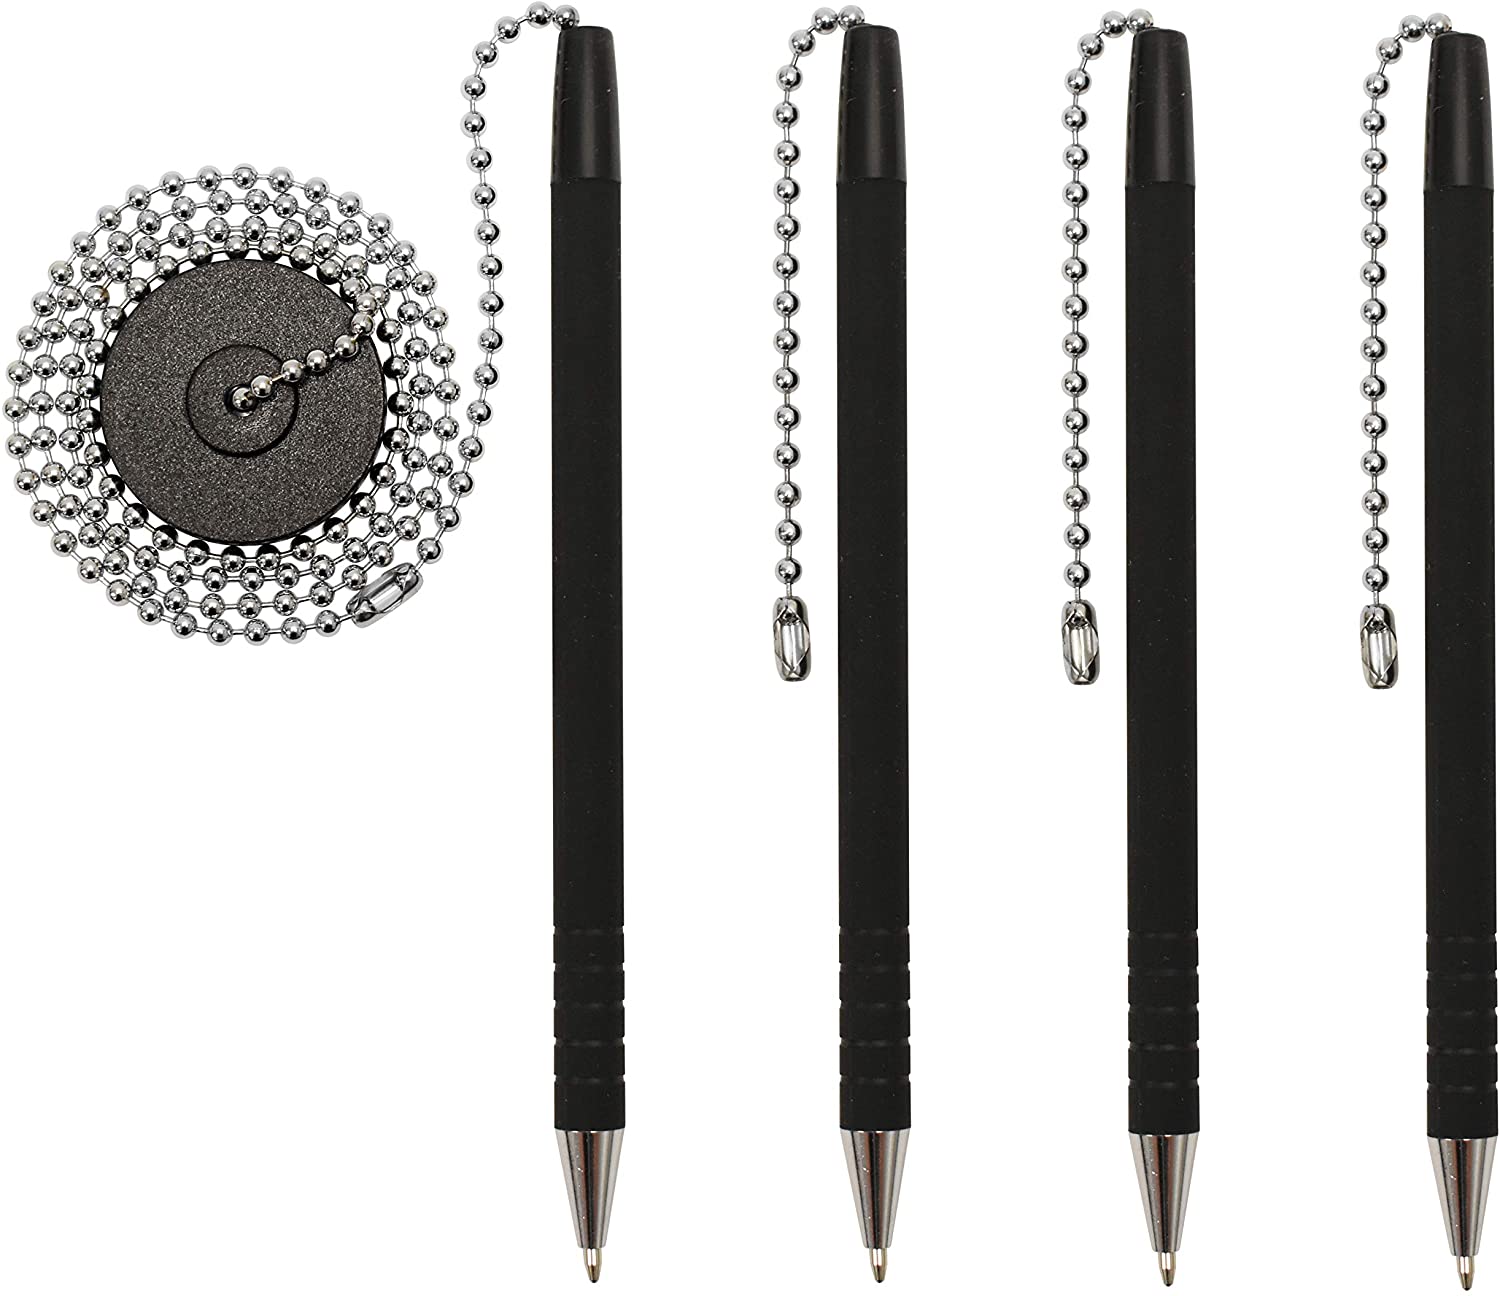 Secure Pen With Chain And Office Pen Holder Adhesive, Reception Counter Pen With 26" Ball Pen Chain - 4 Pens Refillable